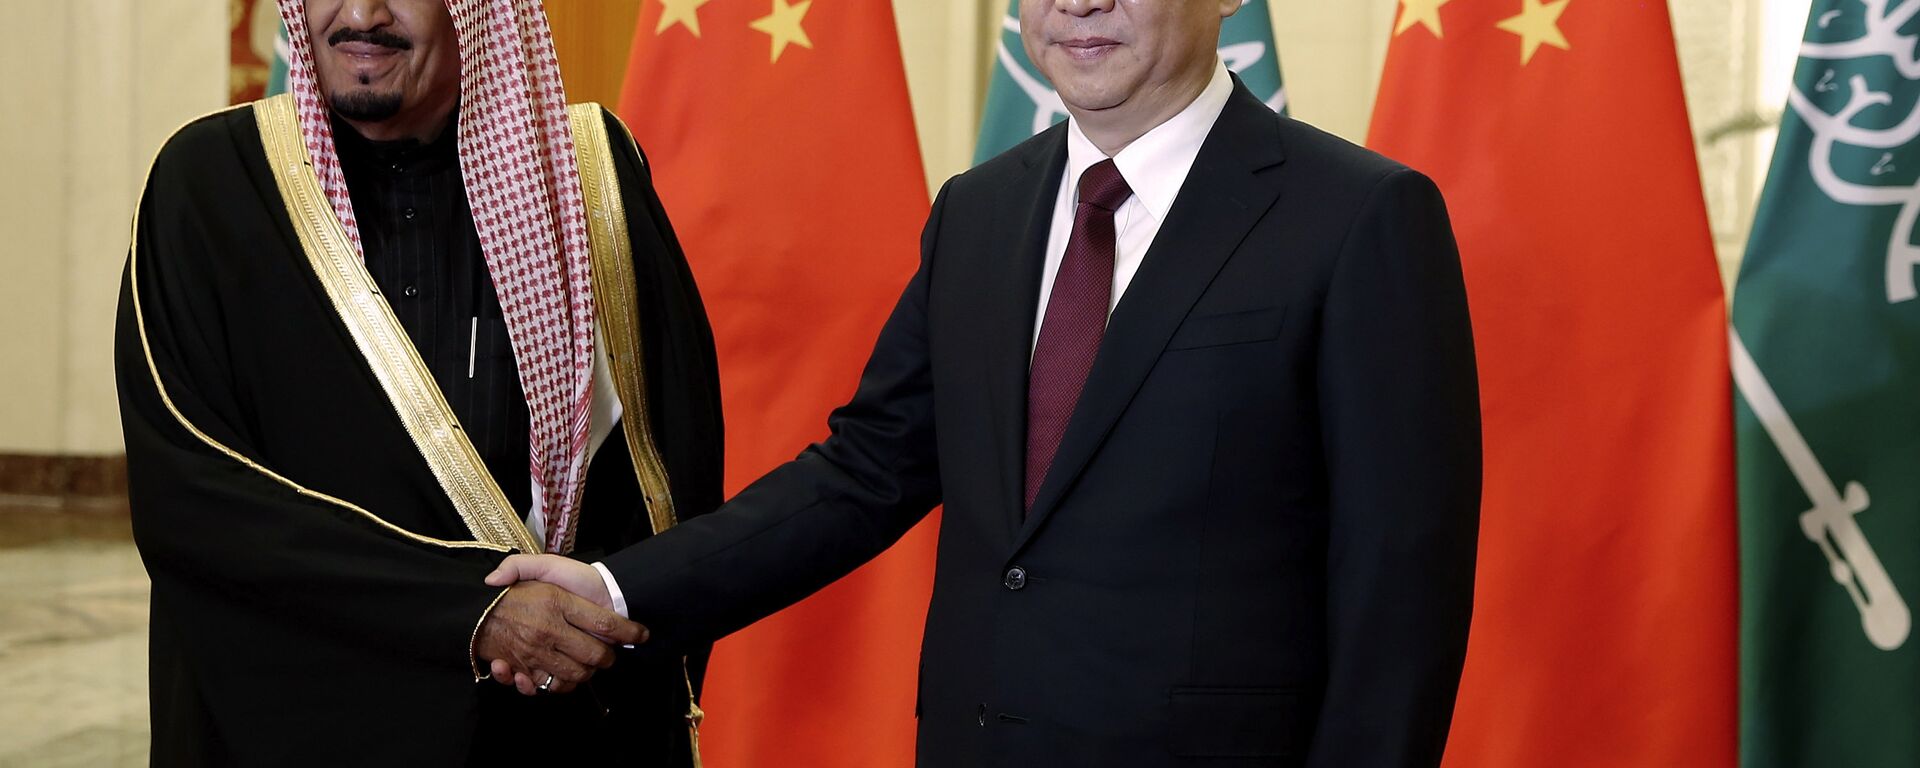 Chinese President Xi Jinping, right, shakes hands with Saudi Prince Salman bin Abdul-Aziz as they pose for photos at the Great Hall of the People in Beijing, China, Thursday, March 13, 2014 - Sputnik International, 1920, 07.12.2022